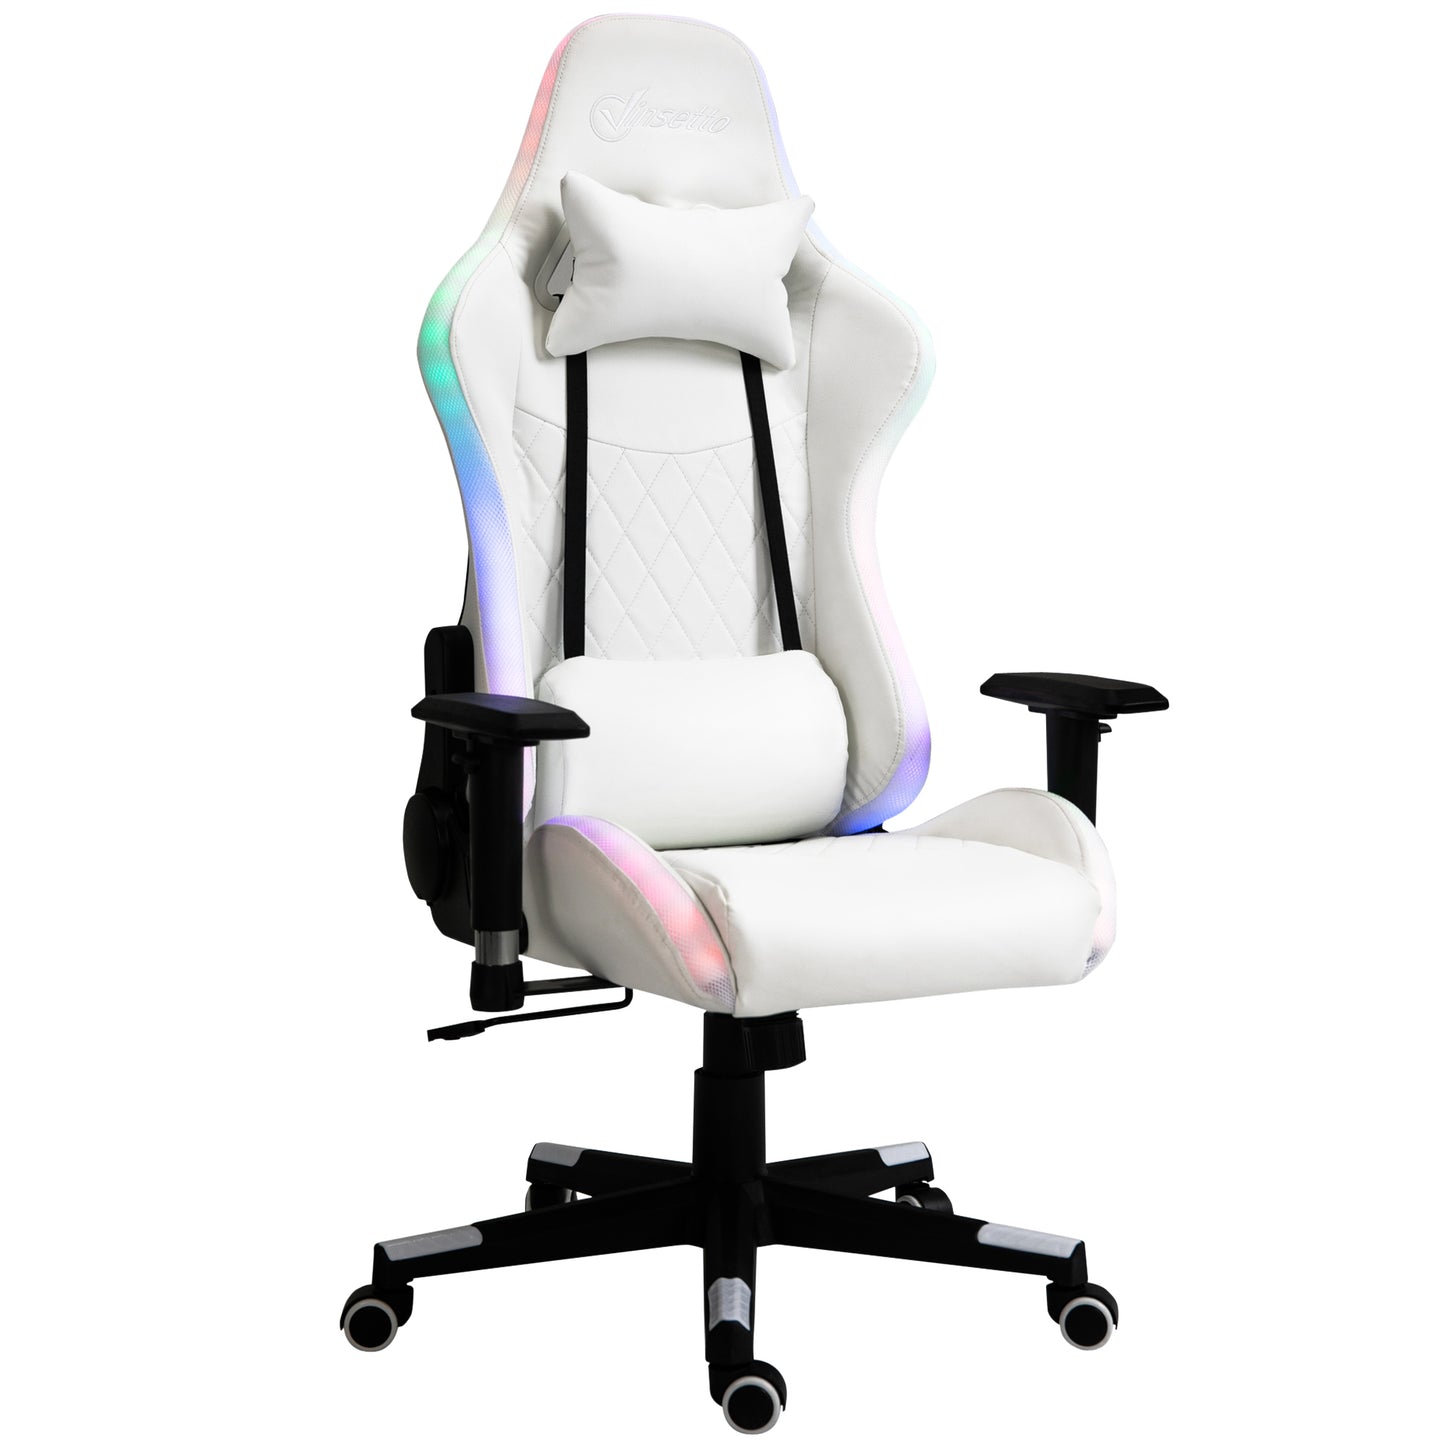 Vinsetto Gaming Chair w/ RGB LED Light, Arm, Swivel Home Office Gamer Recliner, White